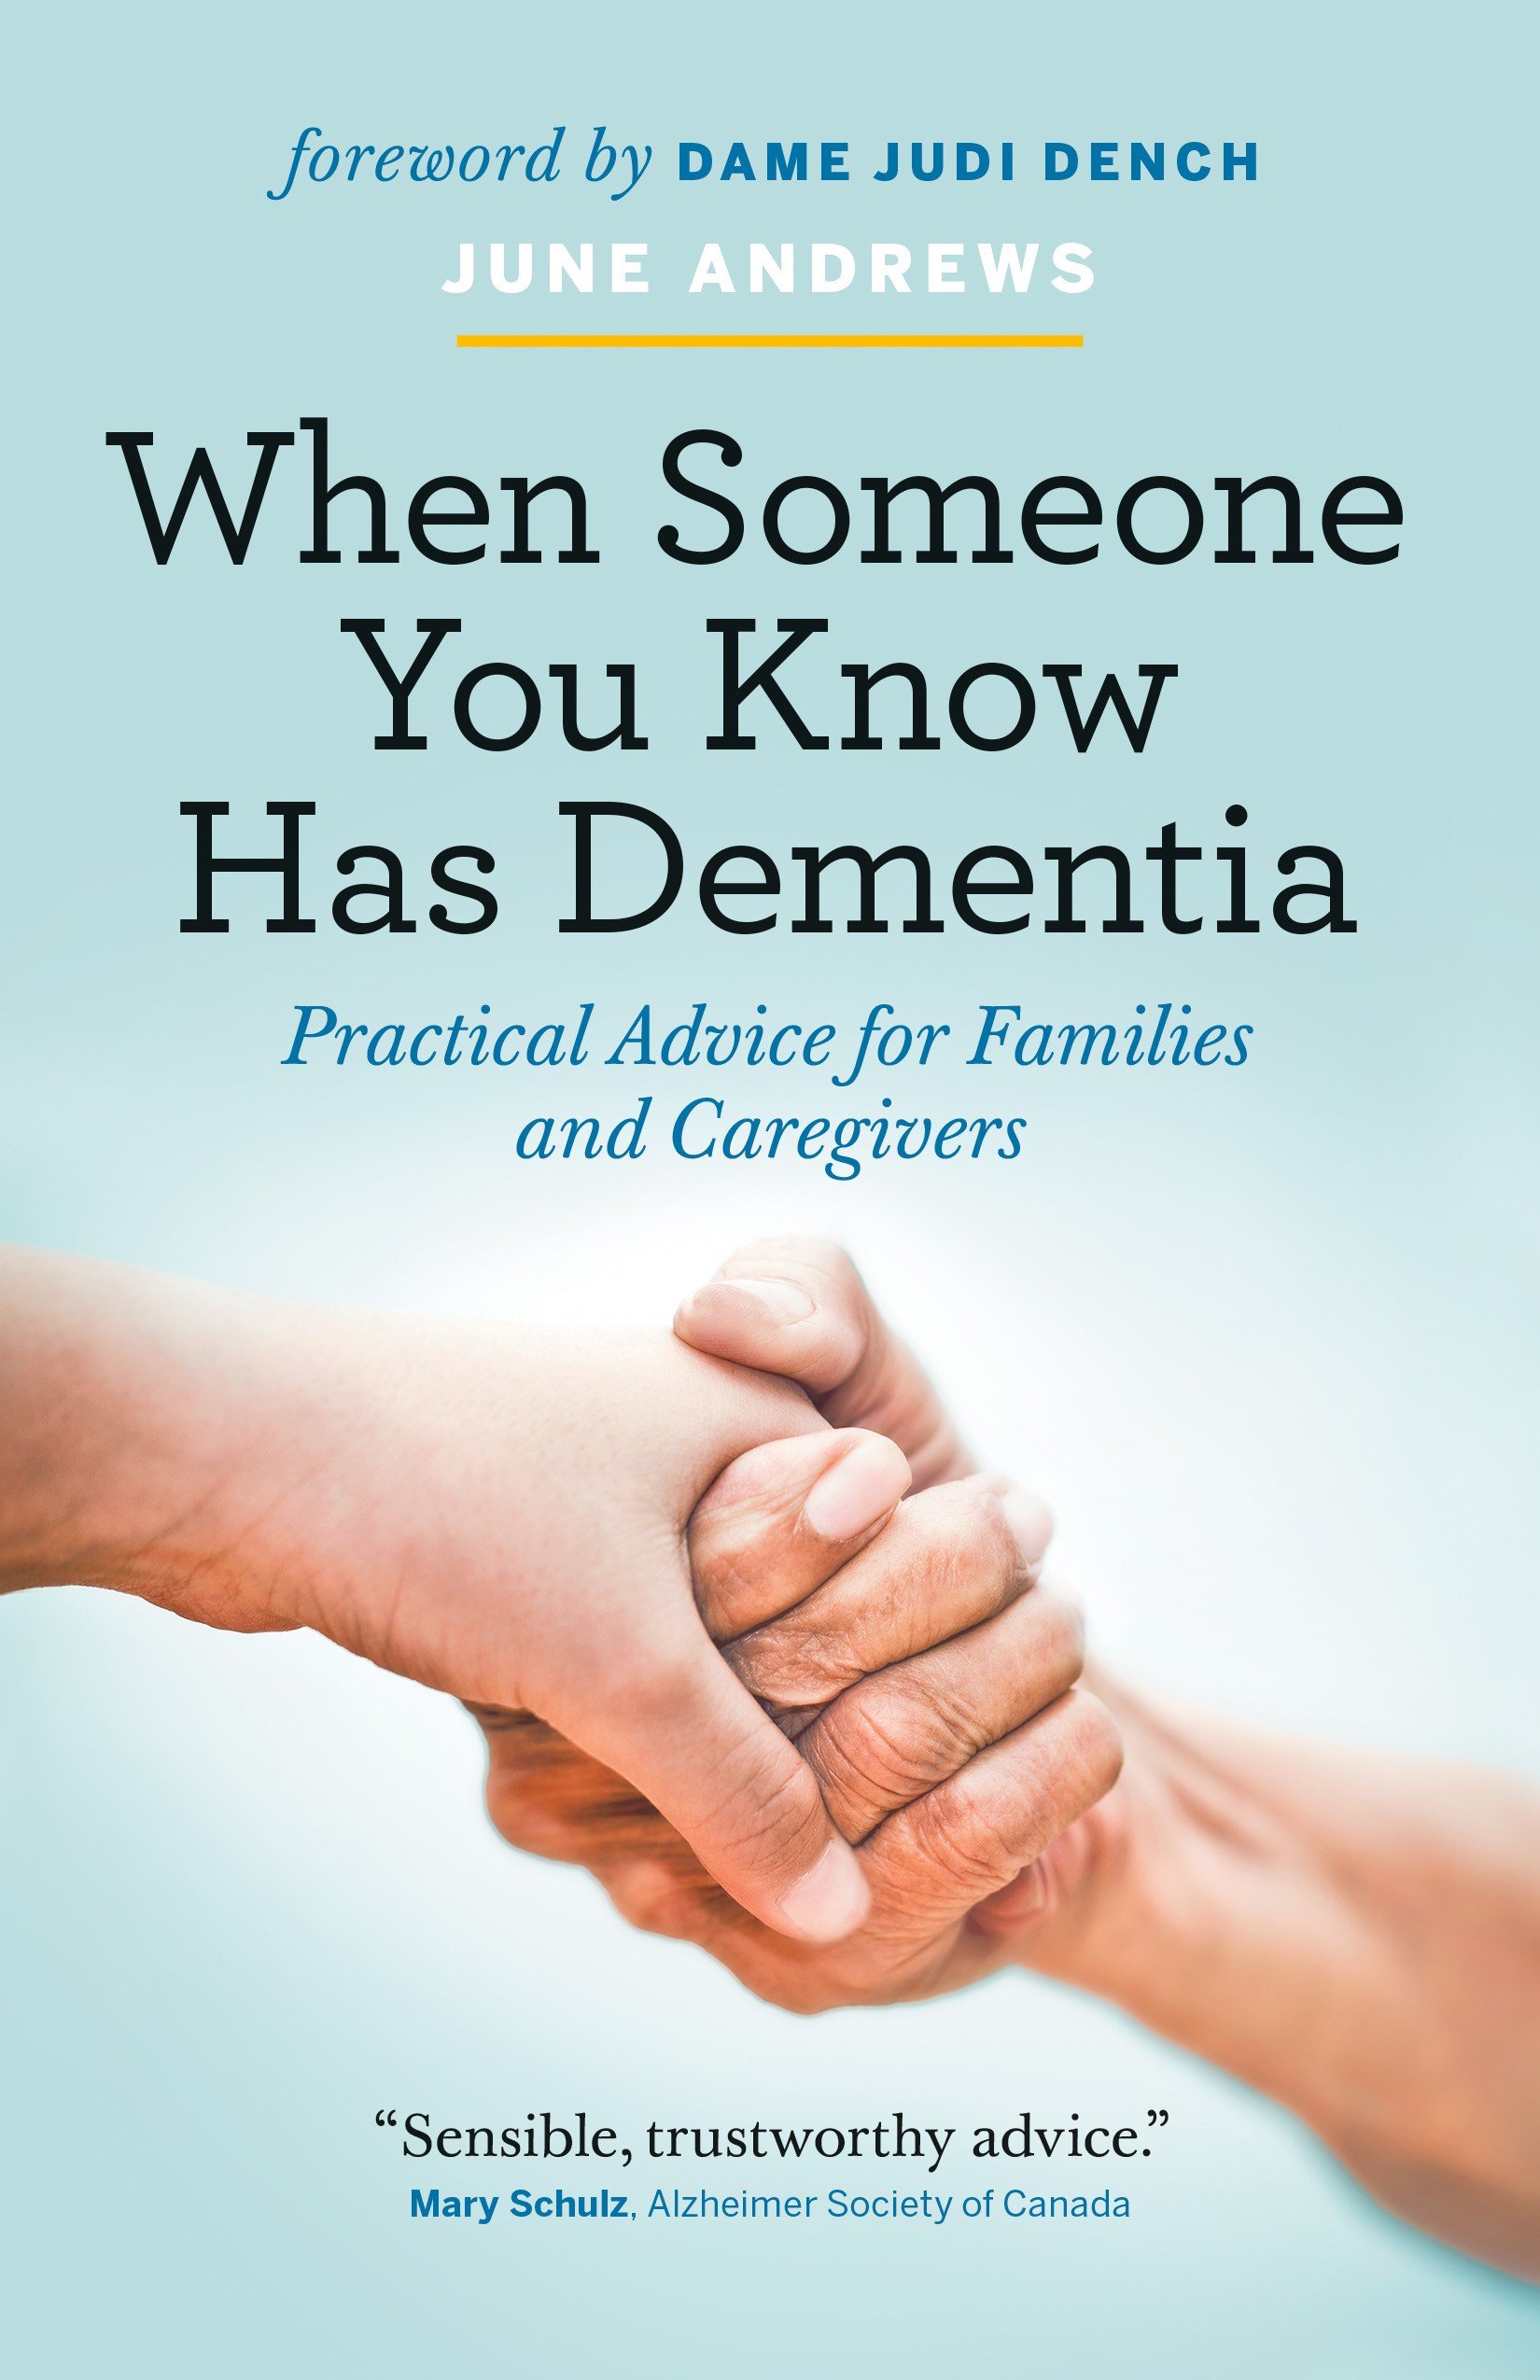 When Someone You Know Has Dementia